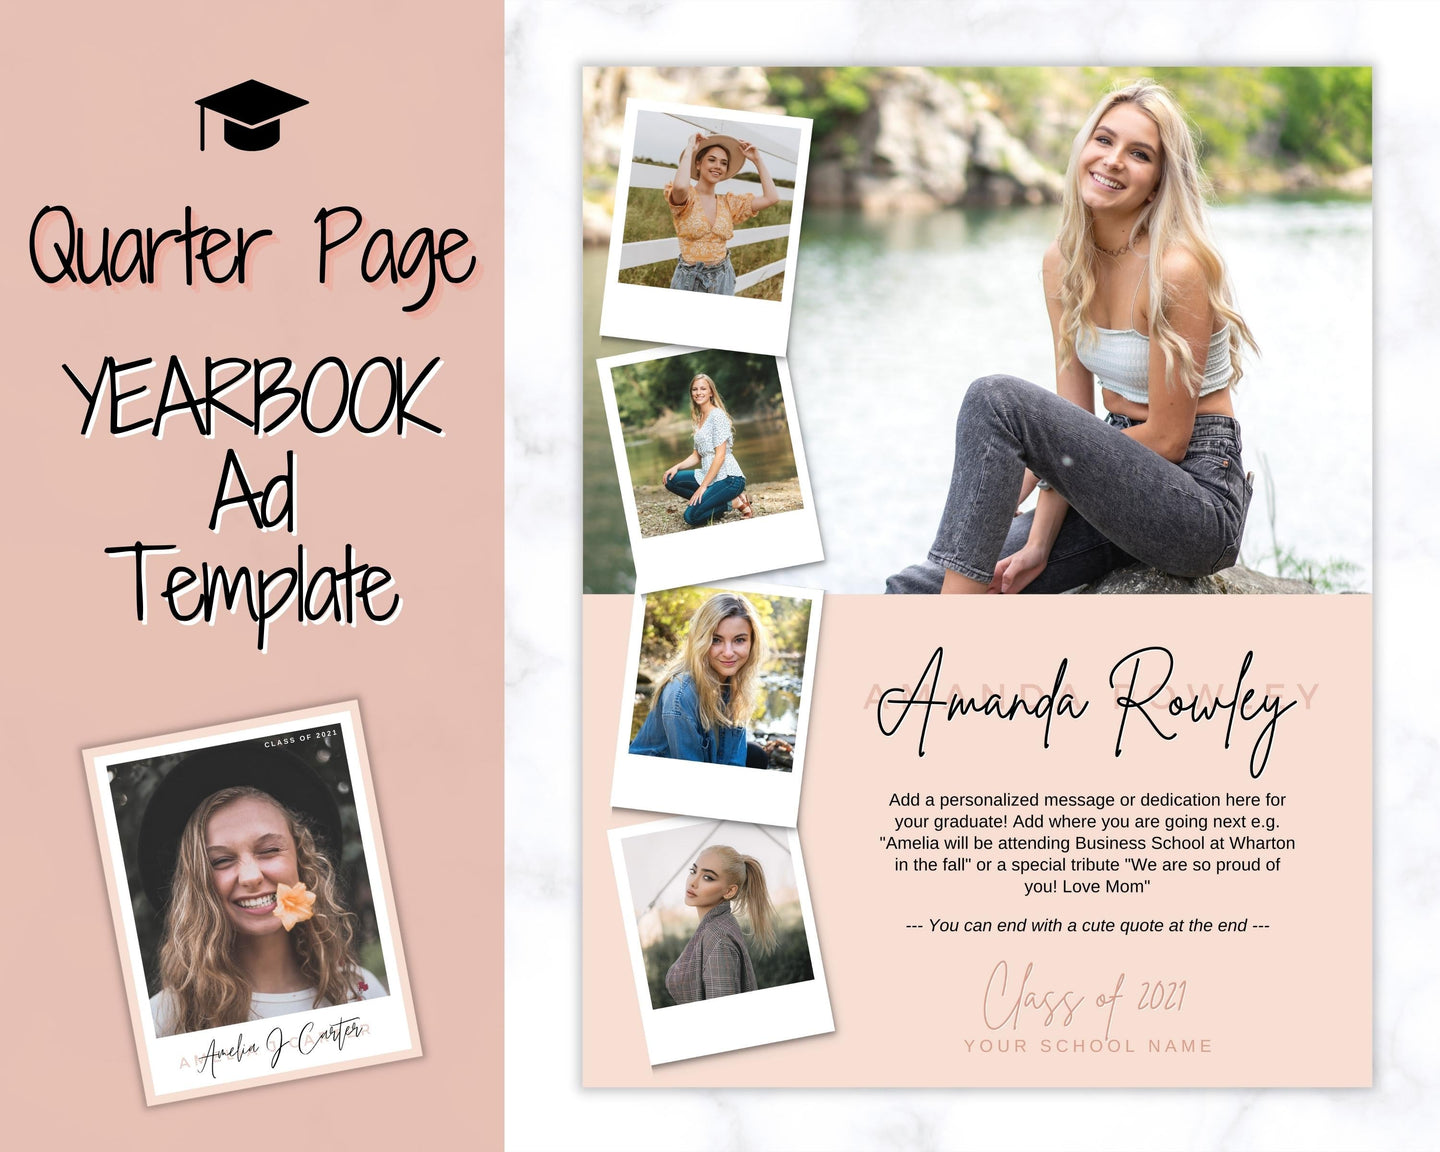 Yearbook AD Template, Senior & High School Graduation, Grad Announcement, School Yearbook, QUARTER Page, Photo Card, Yearbook Ad, Tribute | Post Vertical